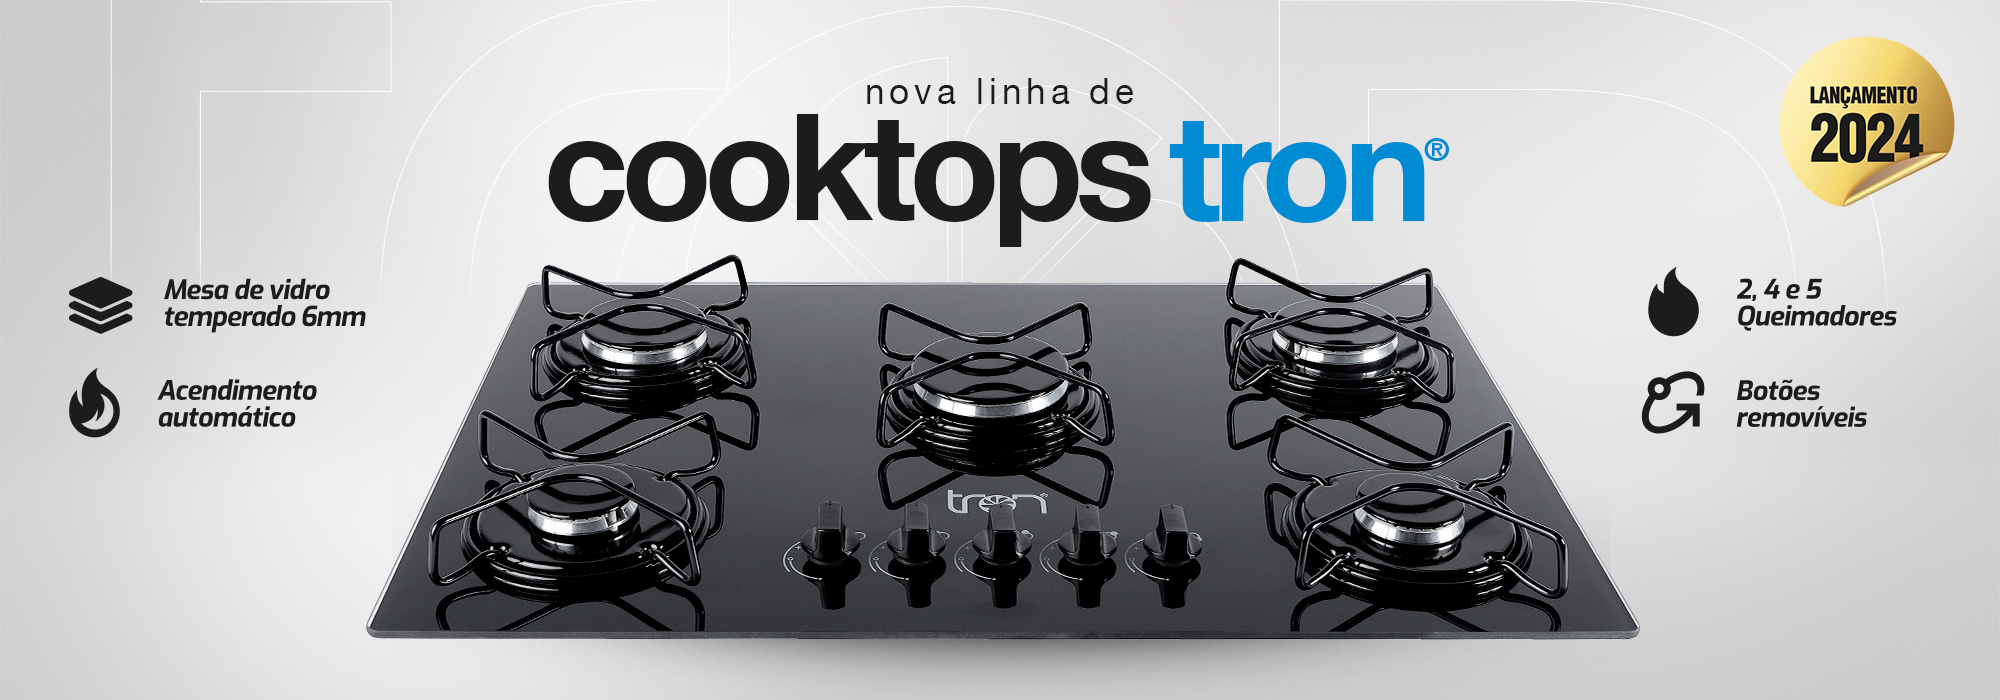 Cooktops Tron